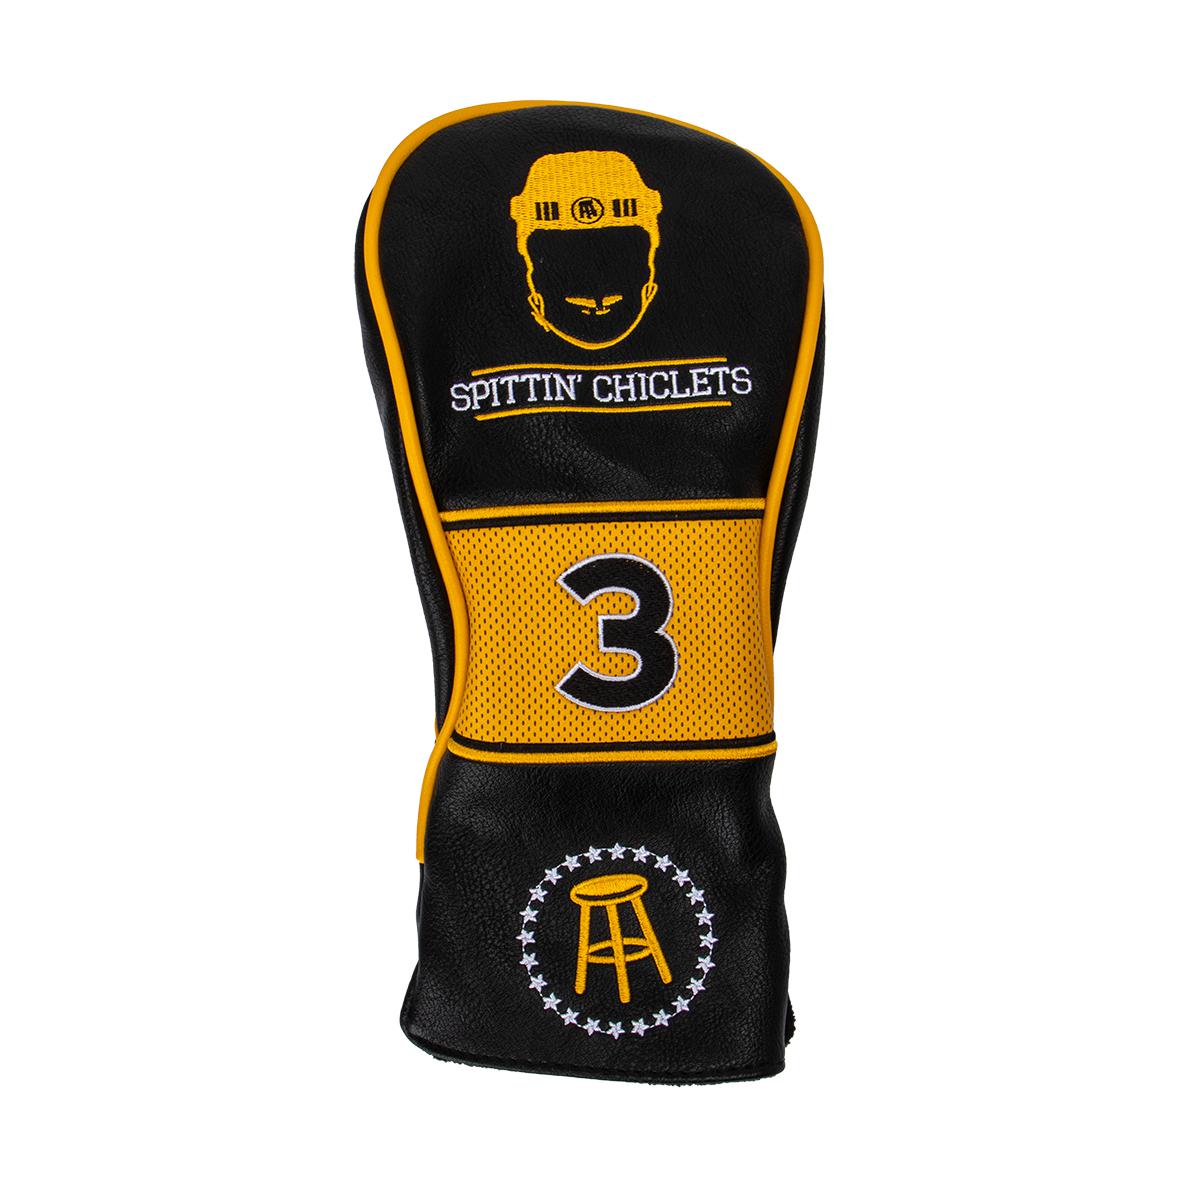 Spittin Chiclets Fairway Wood Headcover-Golf Accessories-Spittin Chiclets-Black-One Size-Barstool Sports